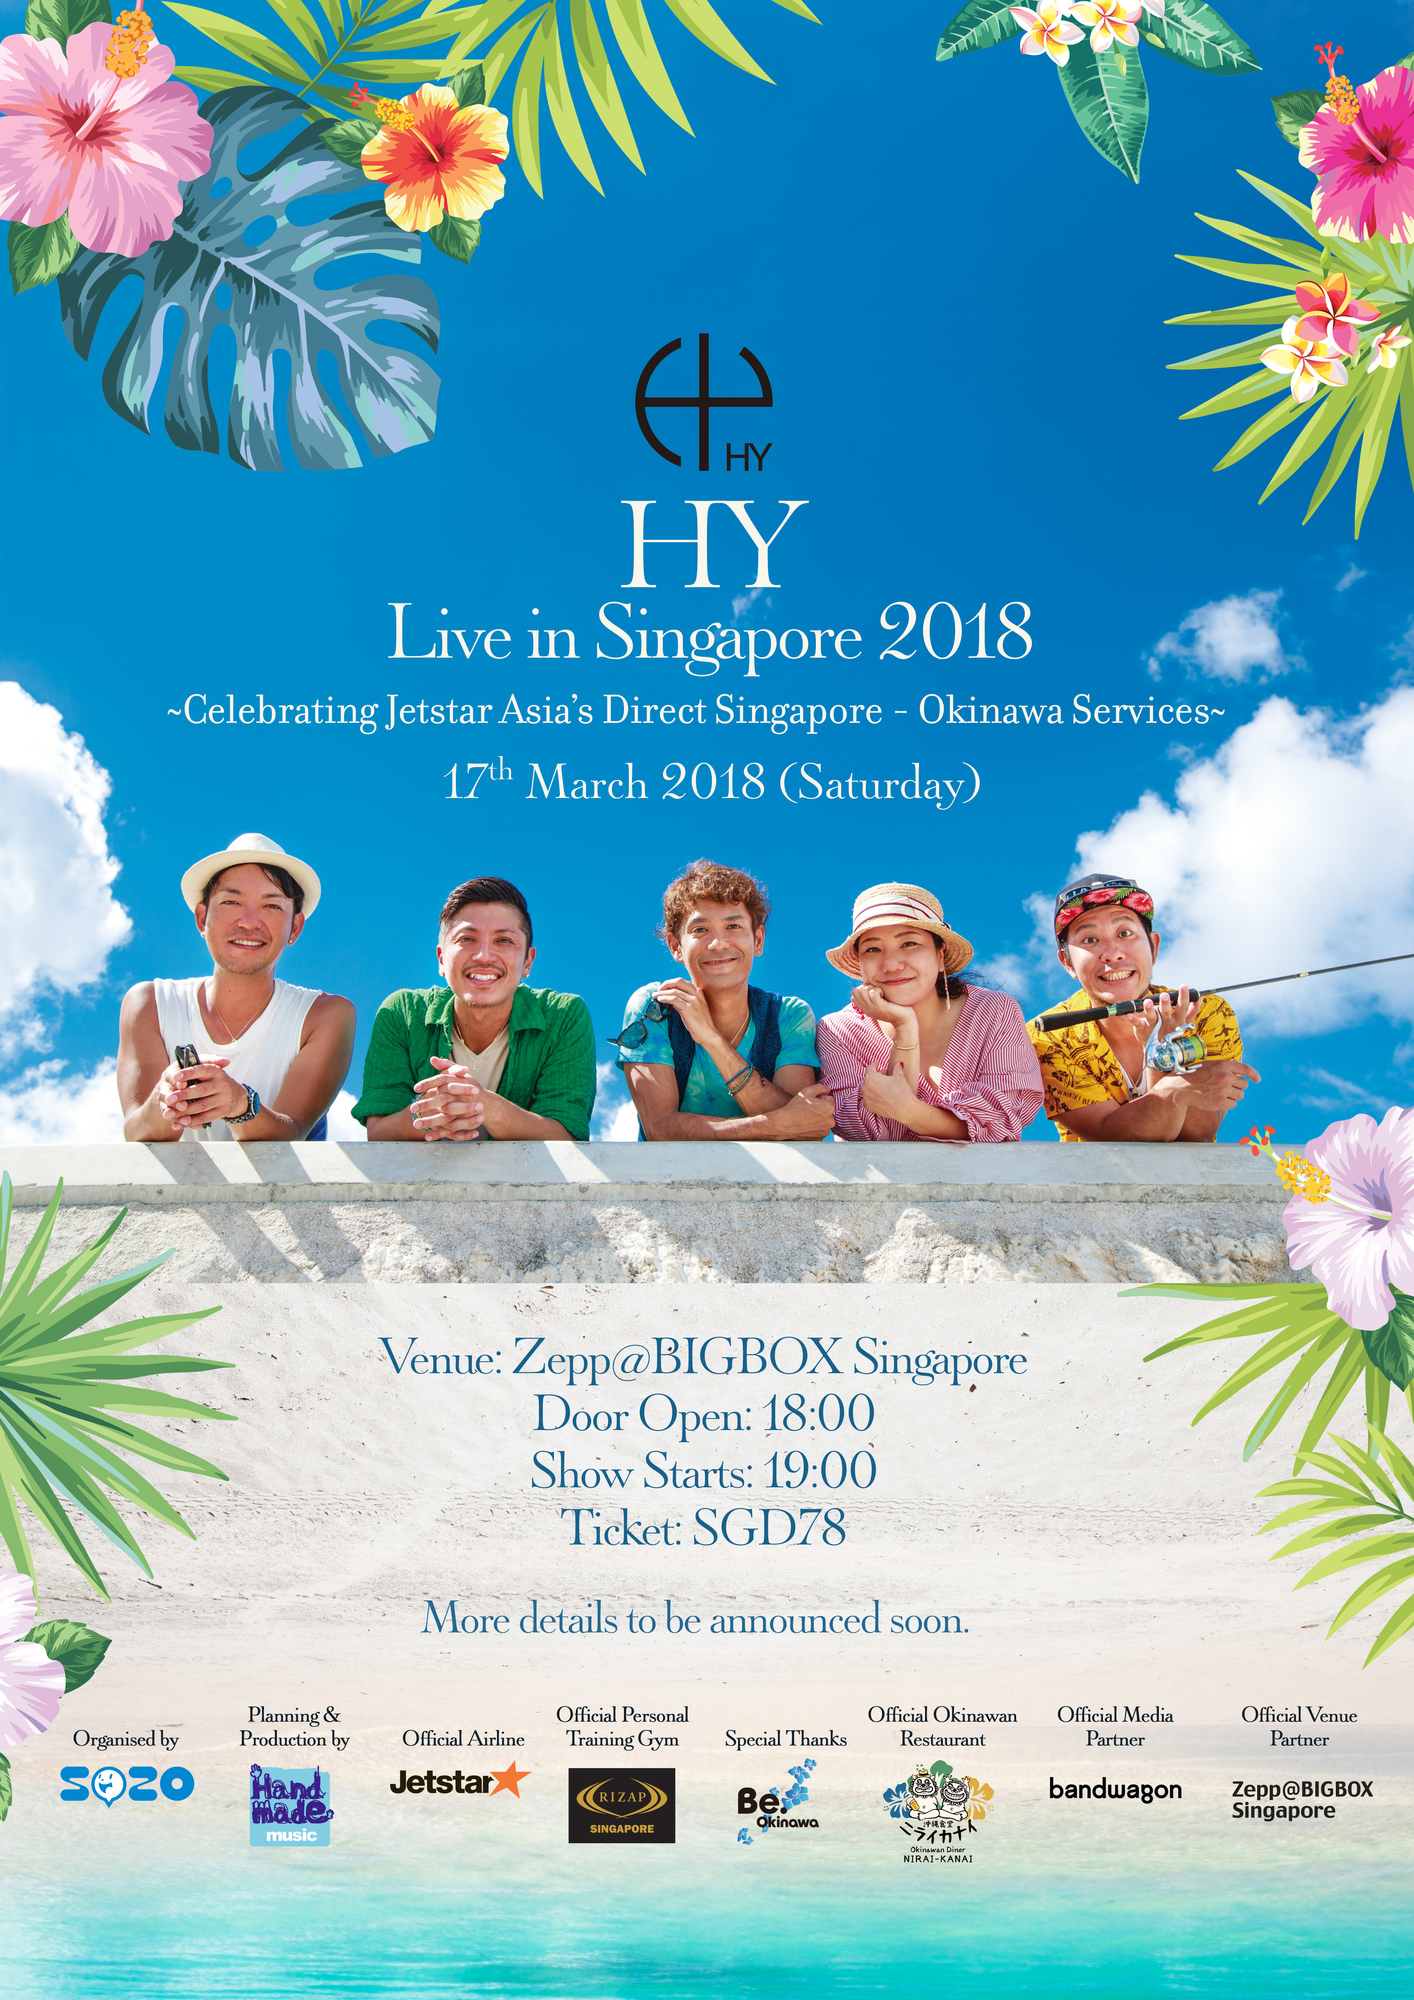 HY Live in Singapore 2018～Celebrating Jetstar Asia’s Direct Singapore - Okinawa Services~